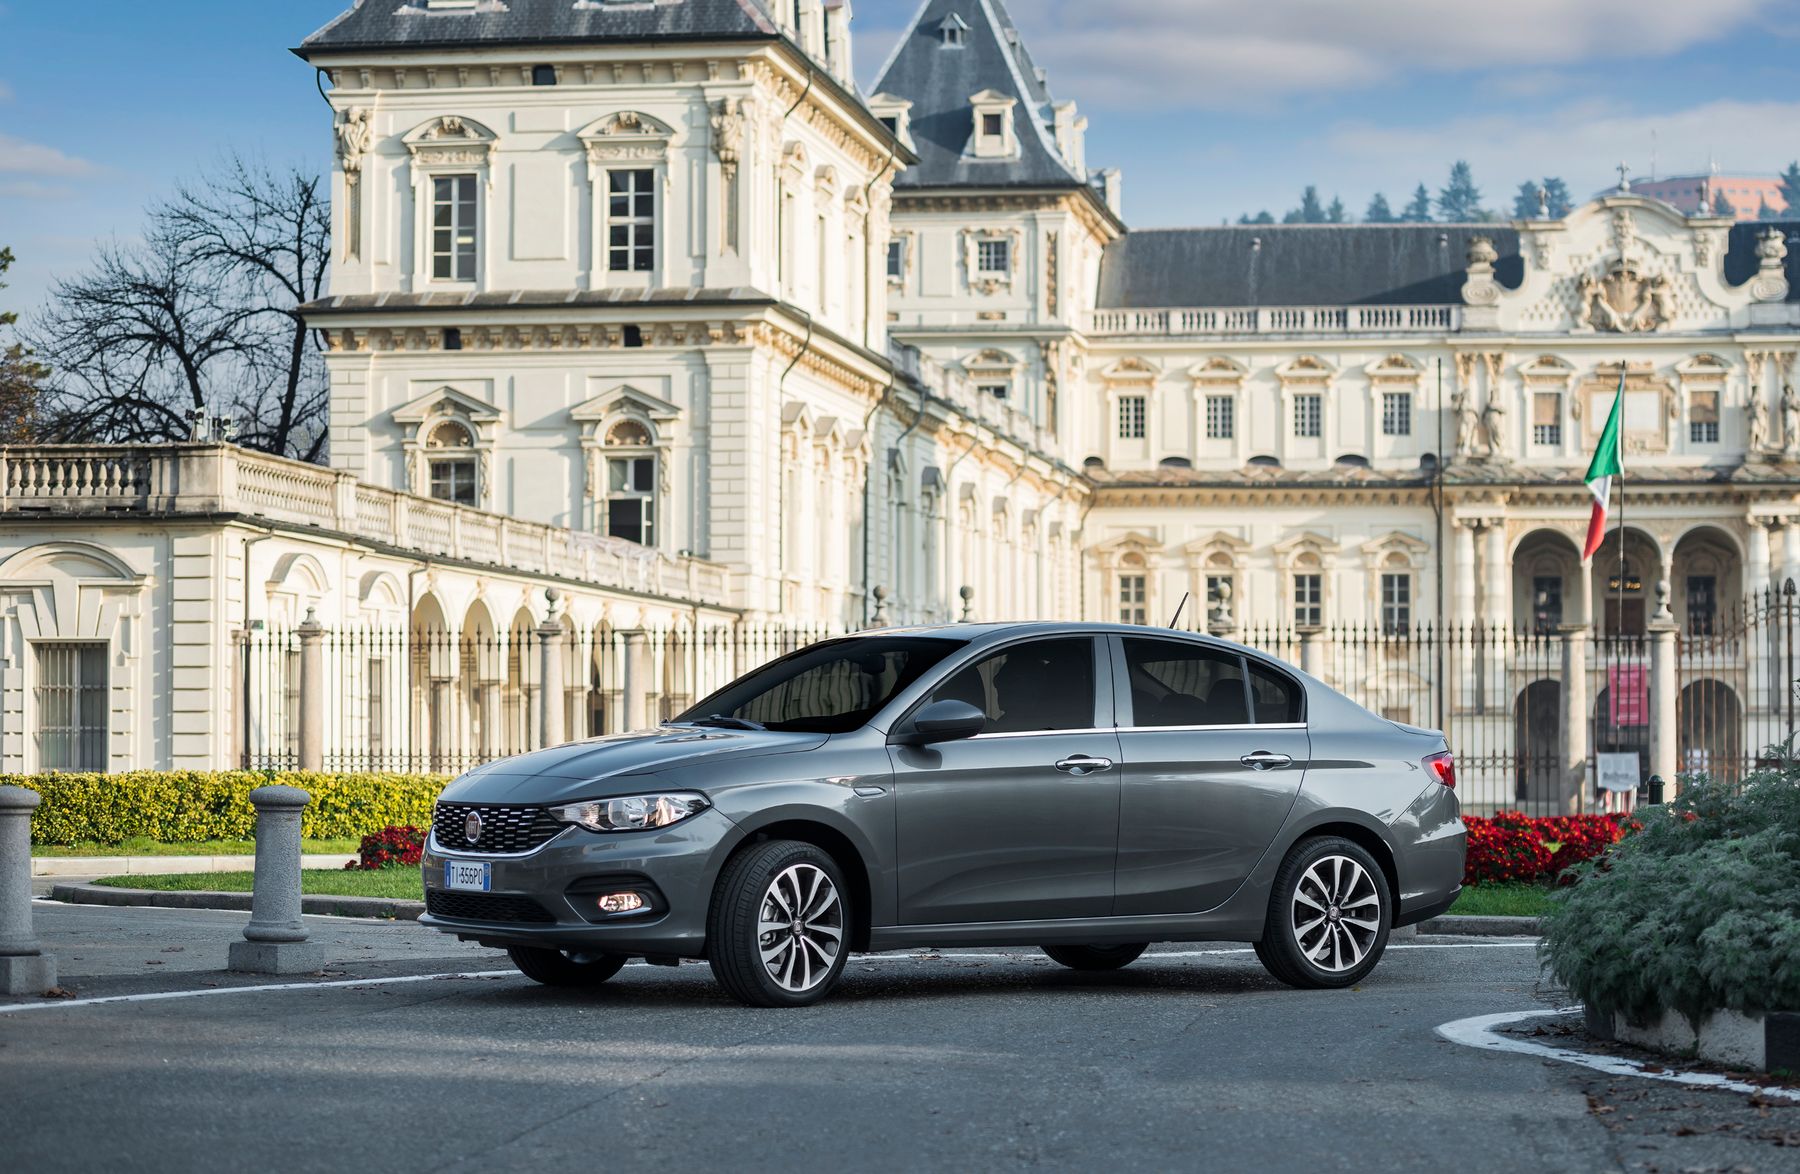 Fiat Tipo sedan. 2nd generation, produced since 2015